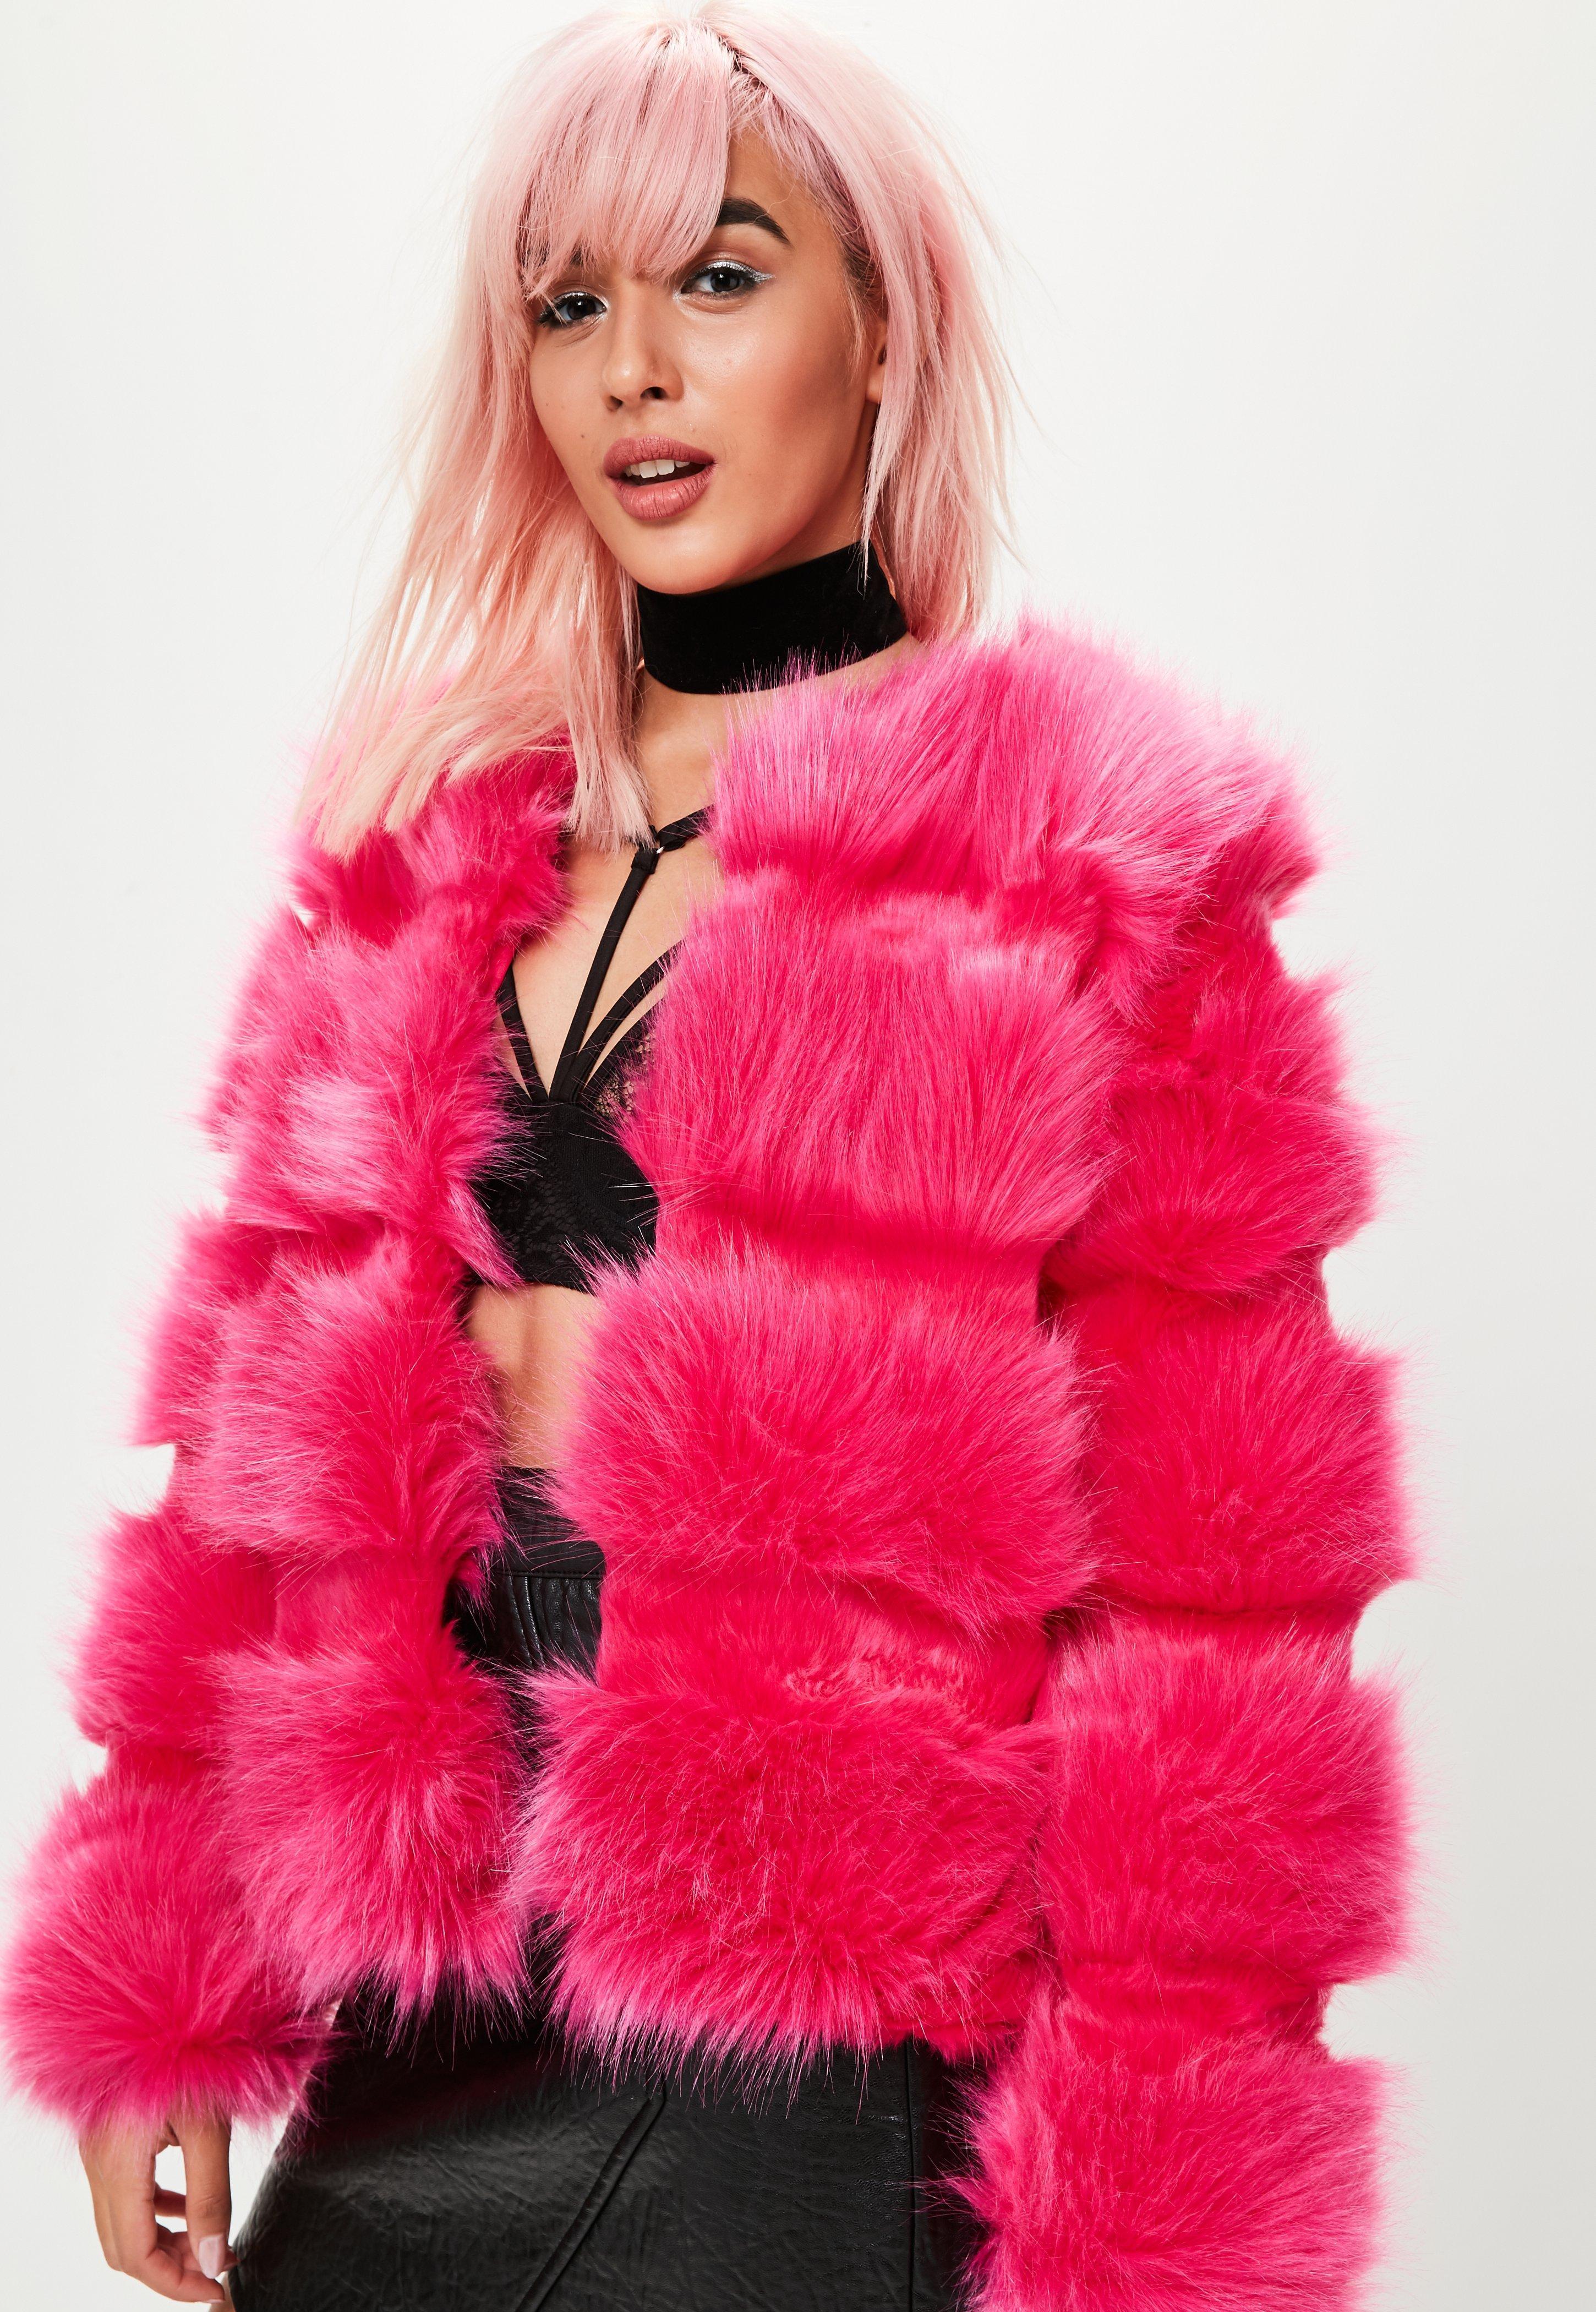 Lyst - Missguided Pink Pelted Short Faux Fur Jacket in Pink